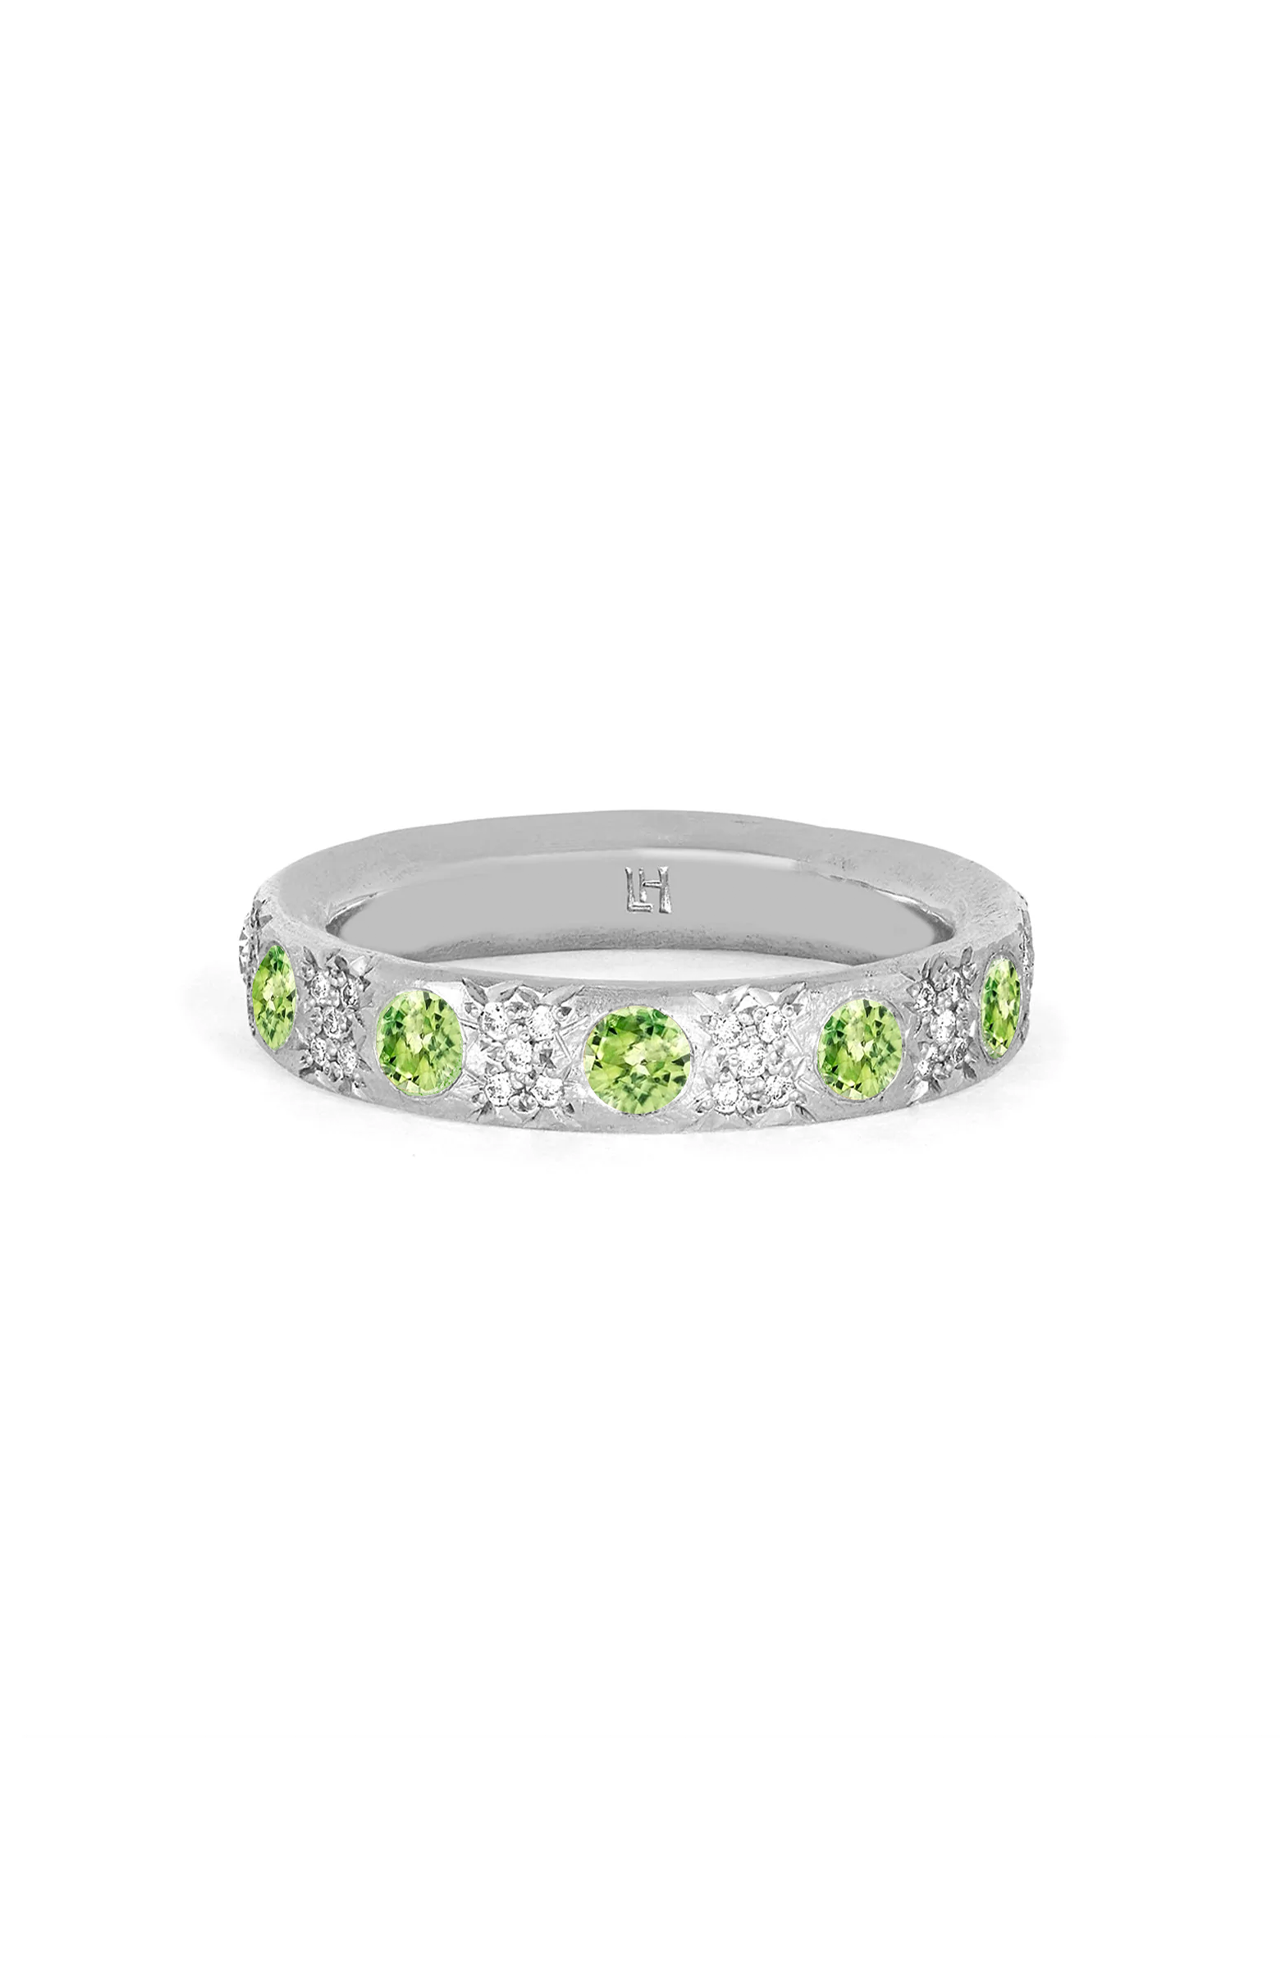 Queen Pave Diamond Band Small Cluster Diamonds Peridot Infinity Style (6992679796851)